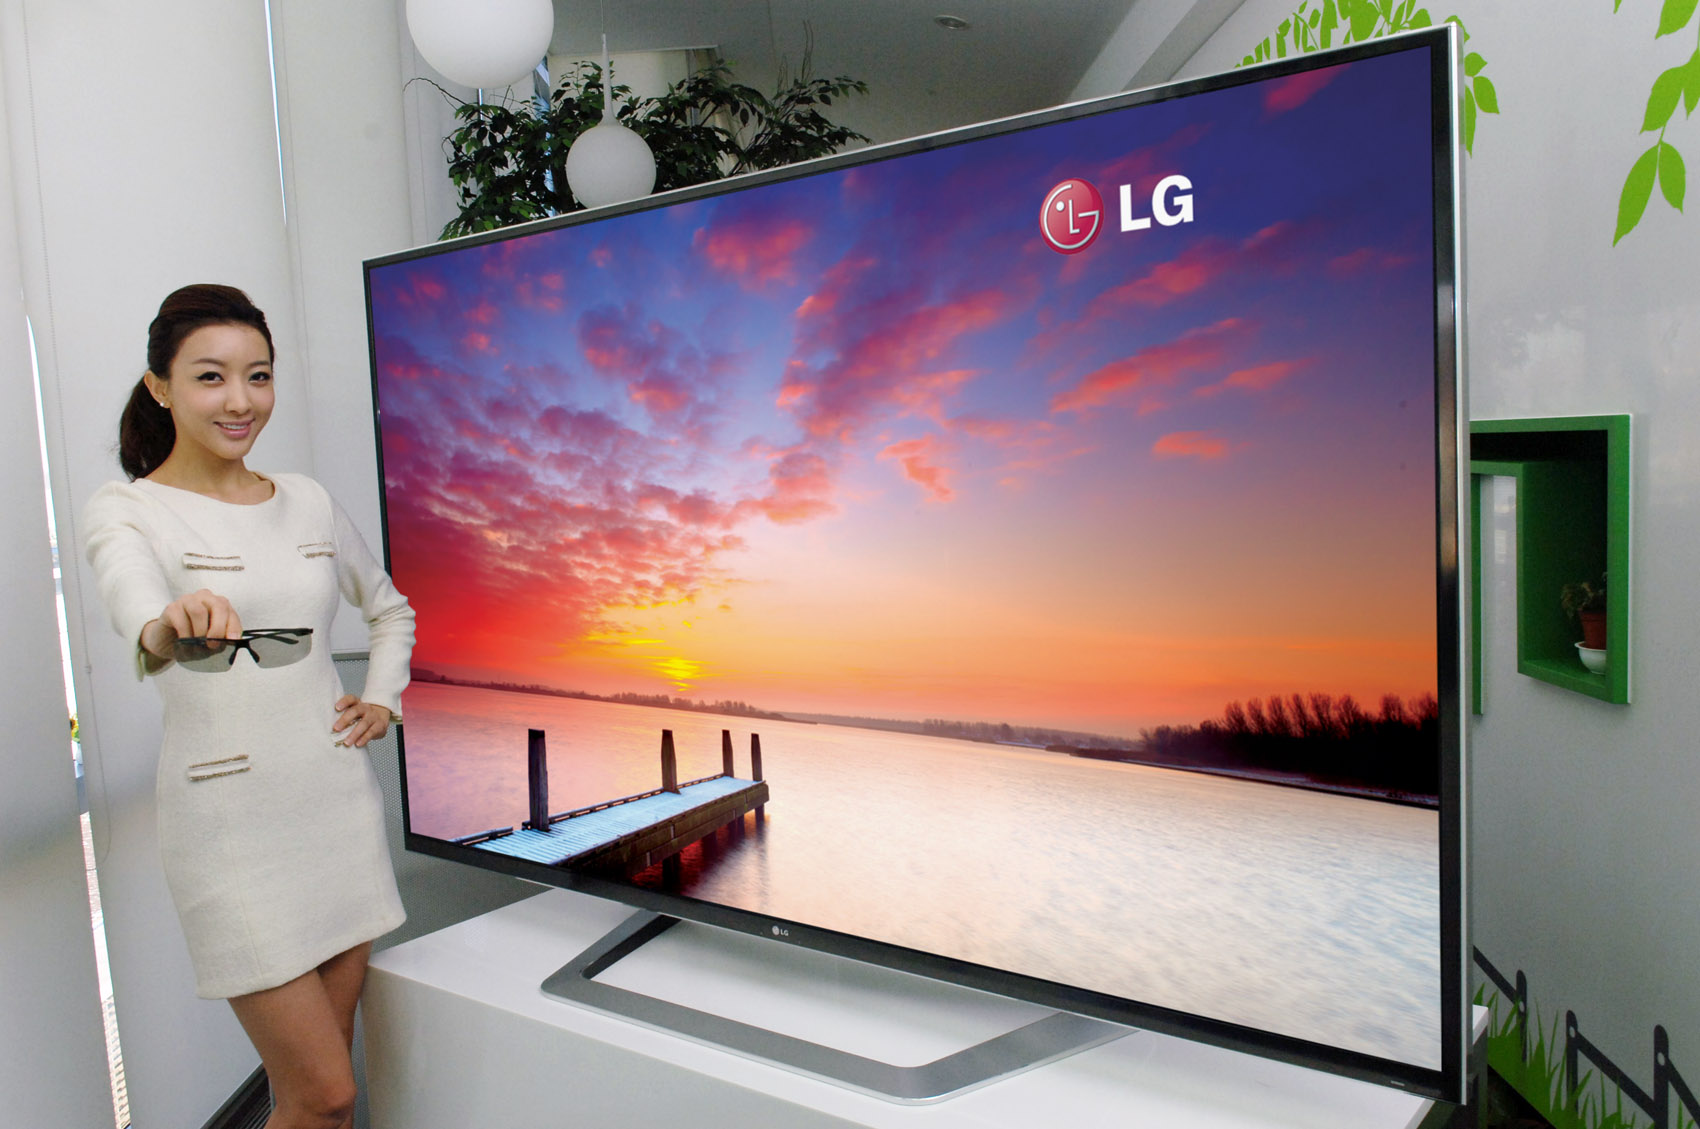 A model holding 3D glasses while showing off the world’s largest 84-inch 3D Ultra Definition TV